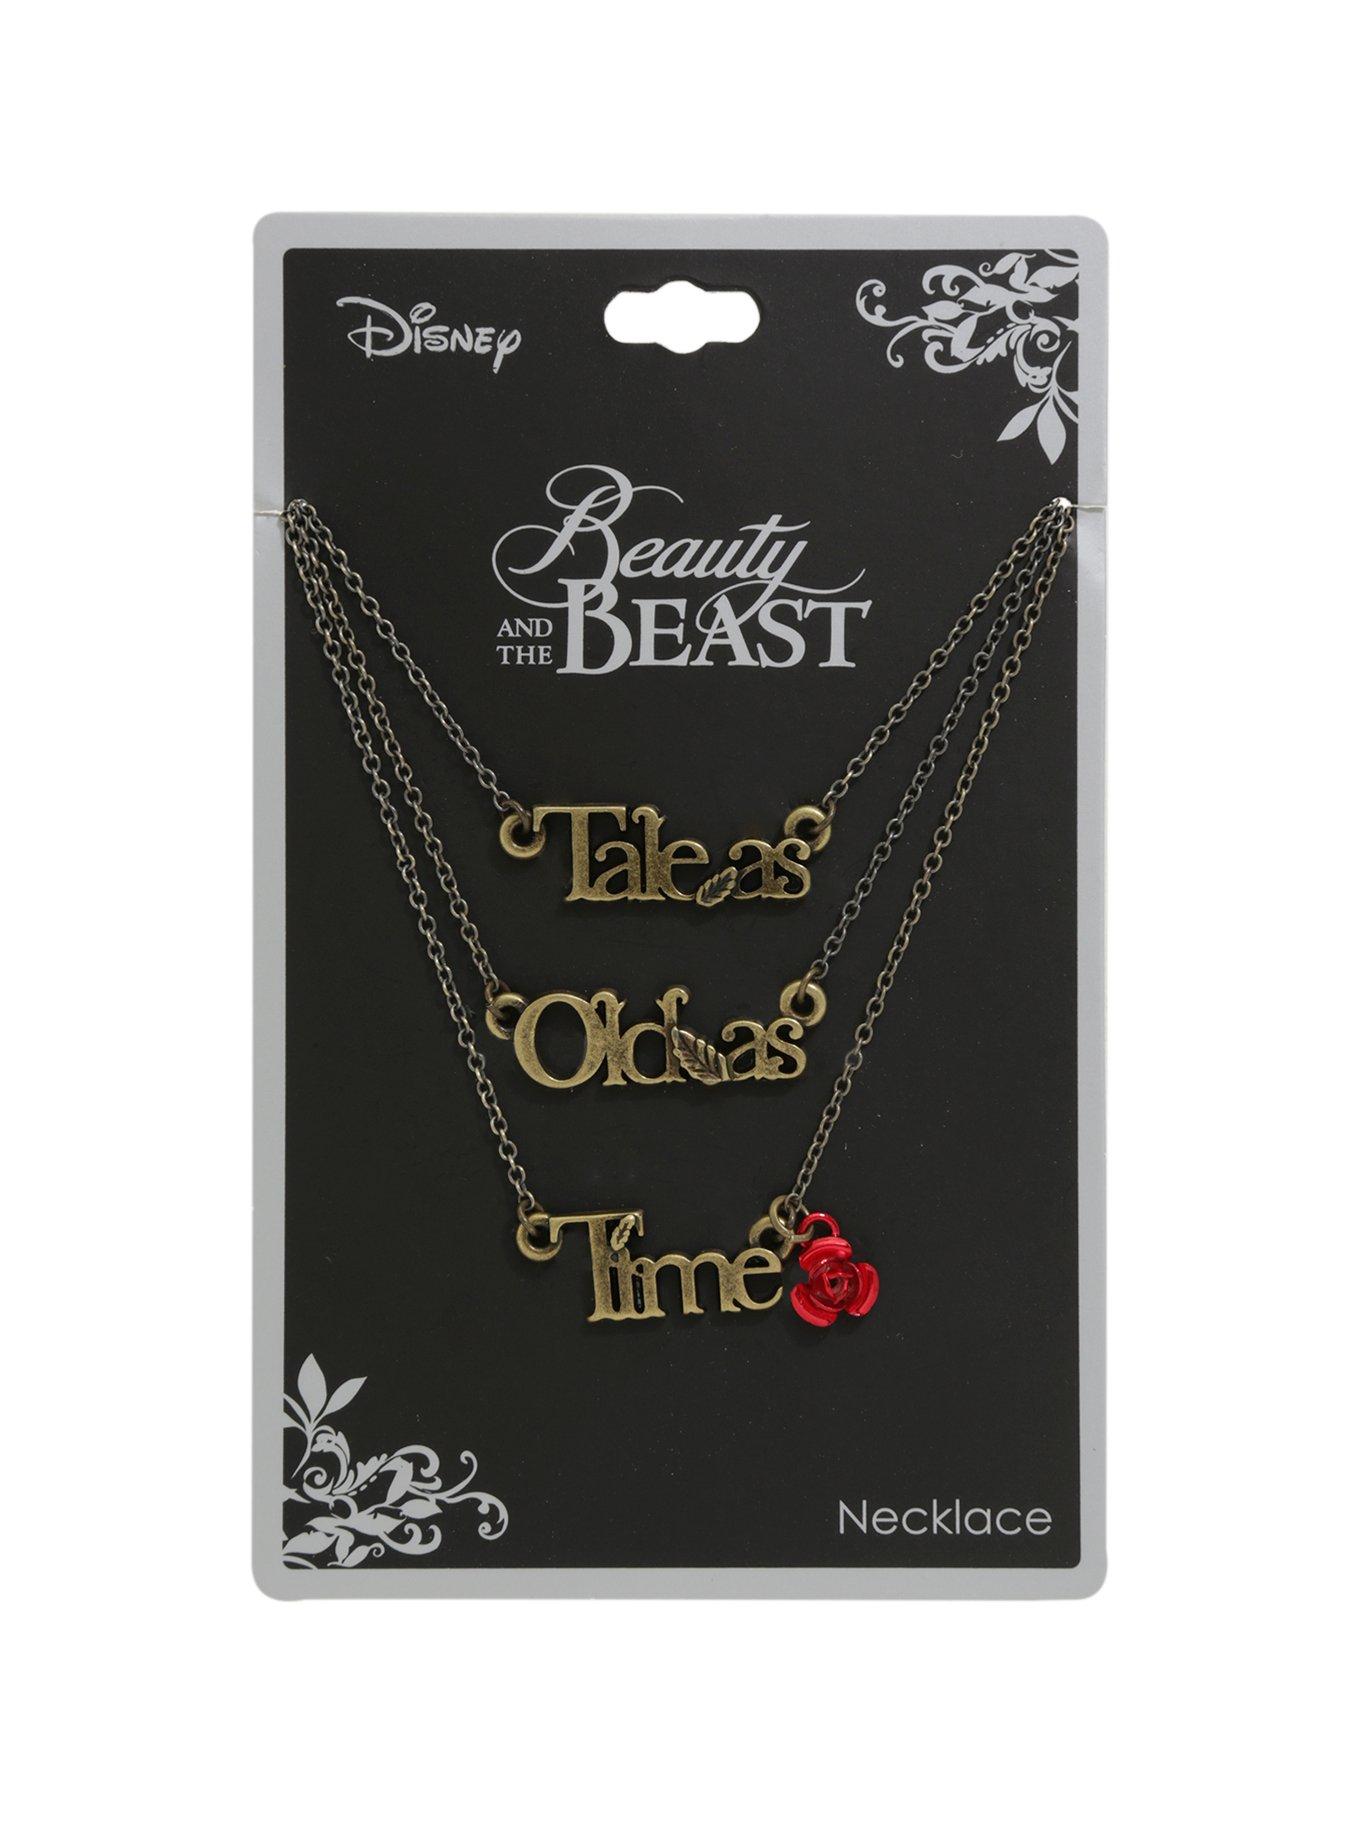 Disney Beauty And The Beast Tale As Old As Time Layered Necklace, , hi-res